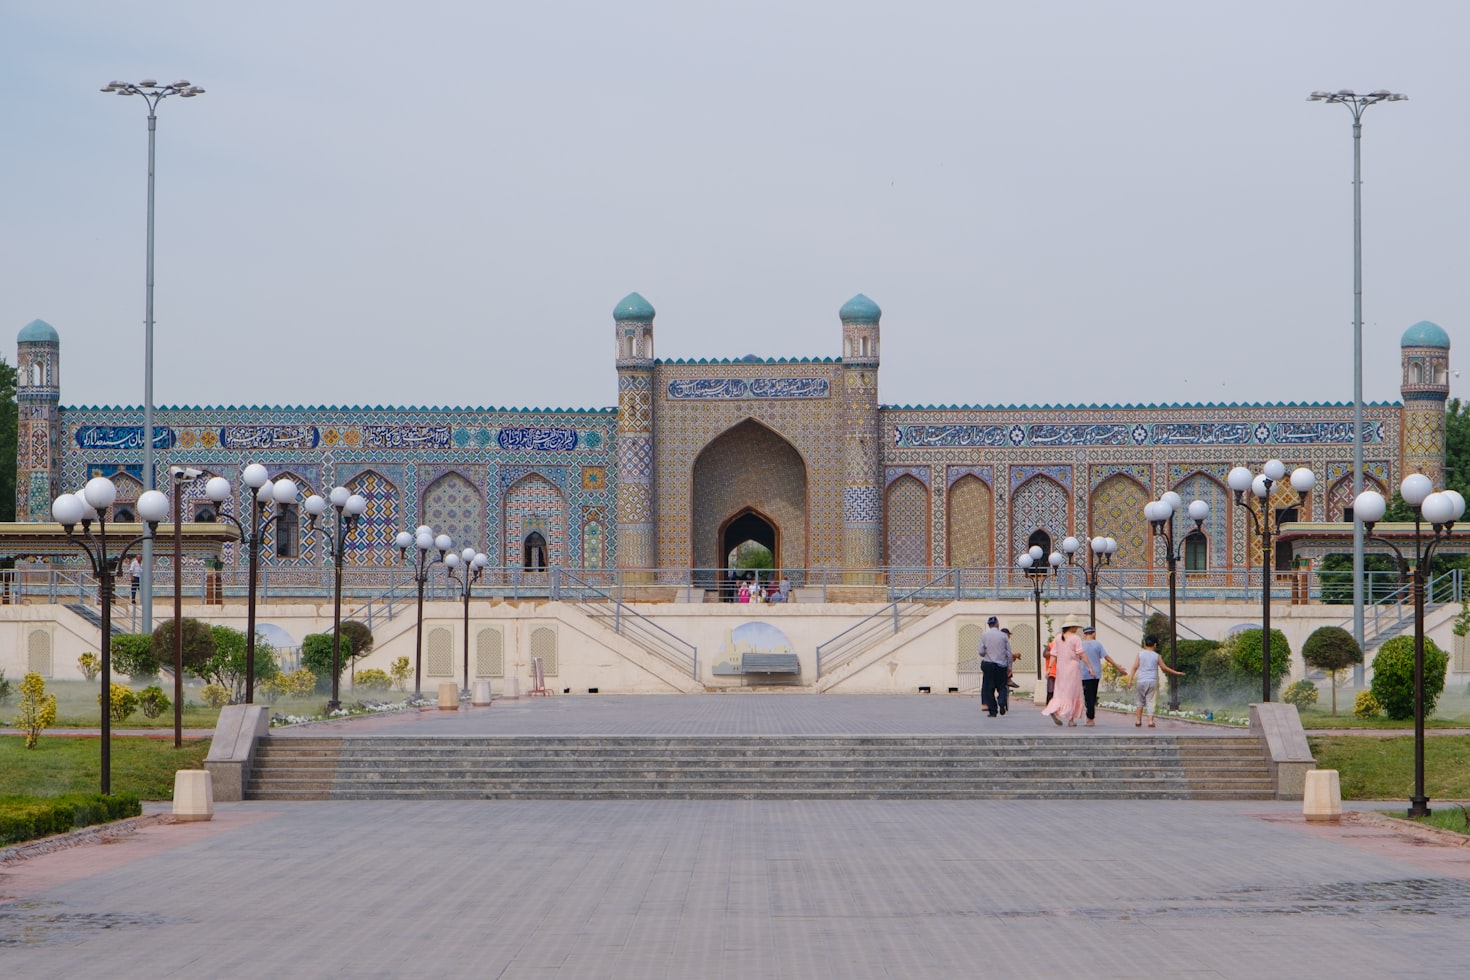 Uzbekistan Travel Guide - Attractions, What to See, Do, Costs, FAQs